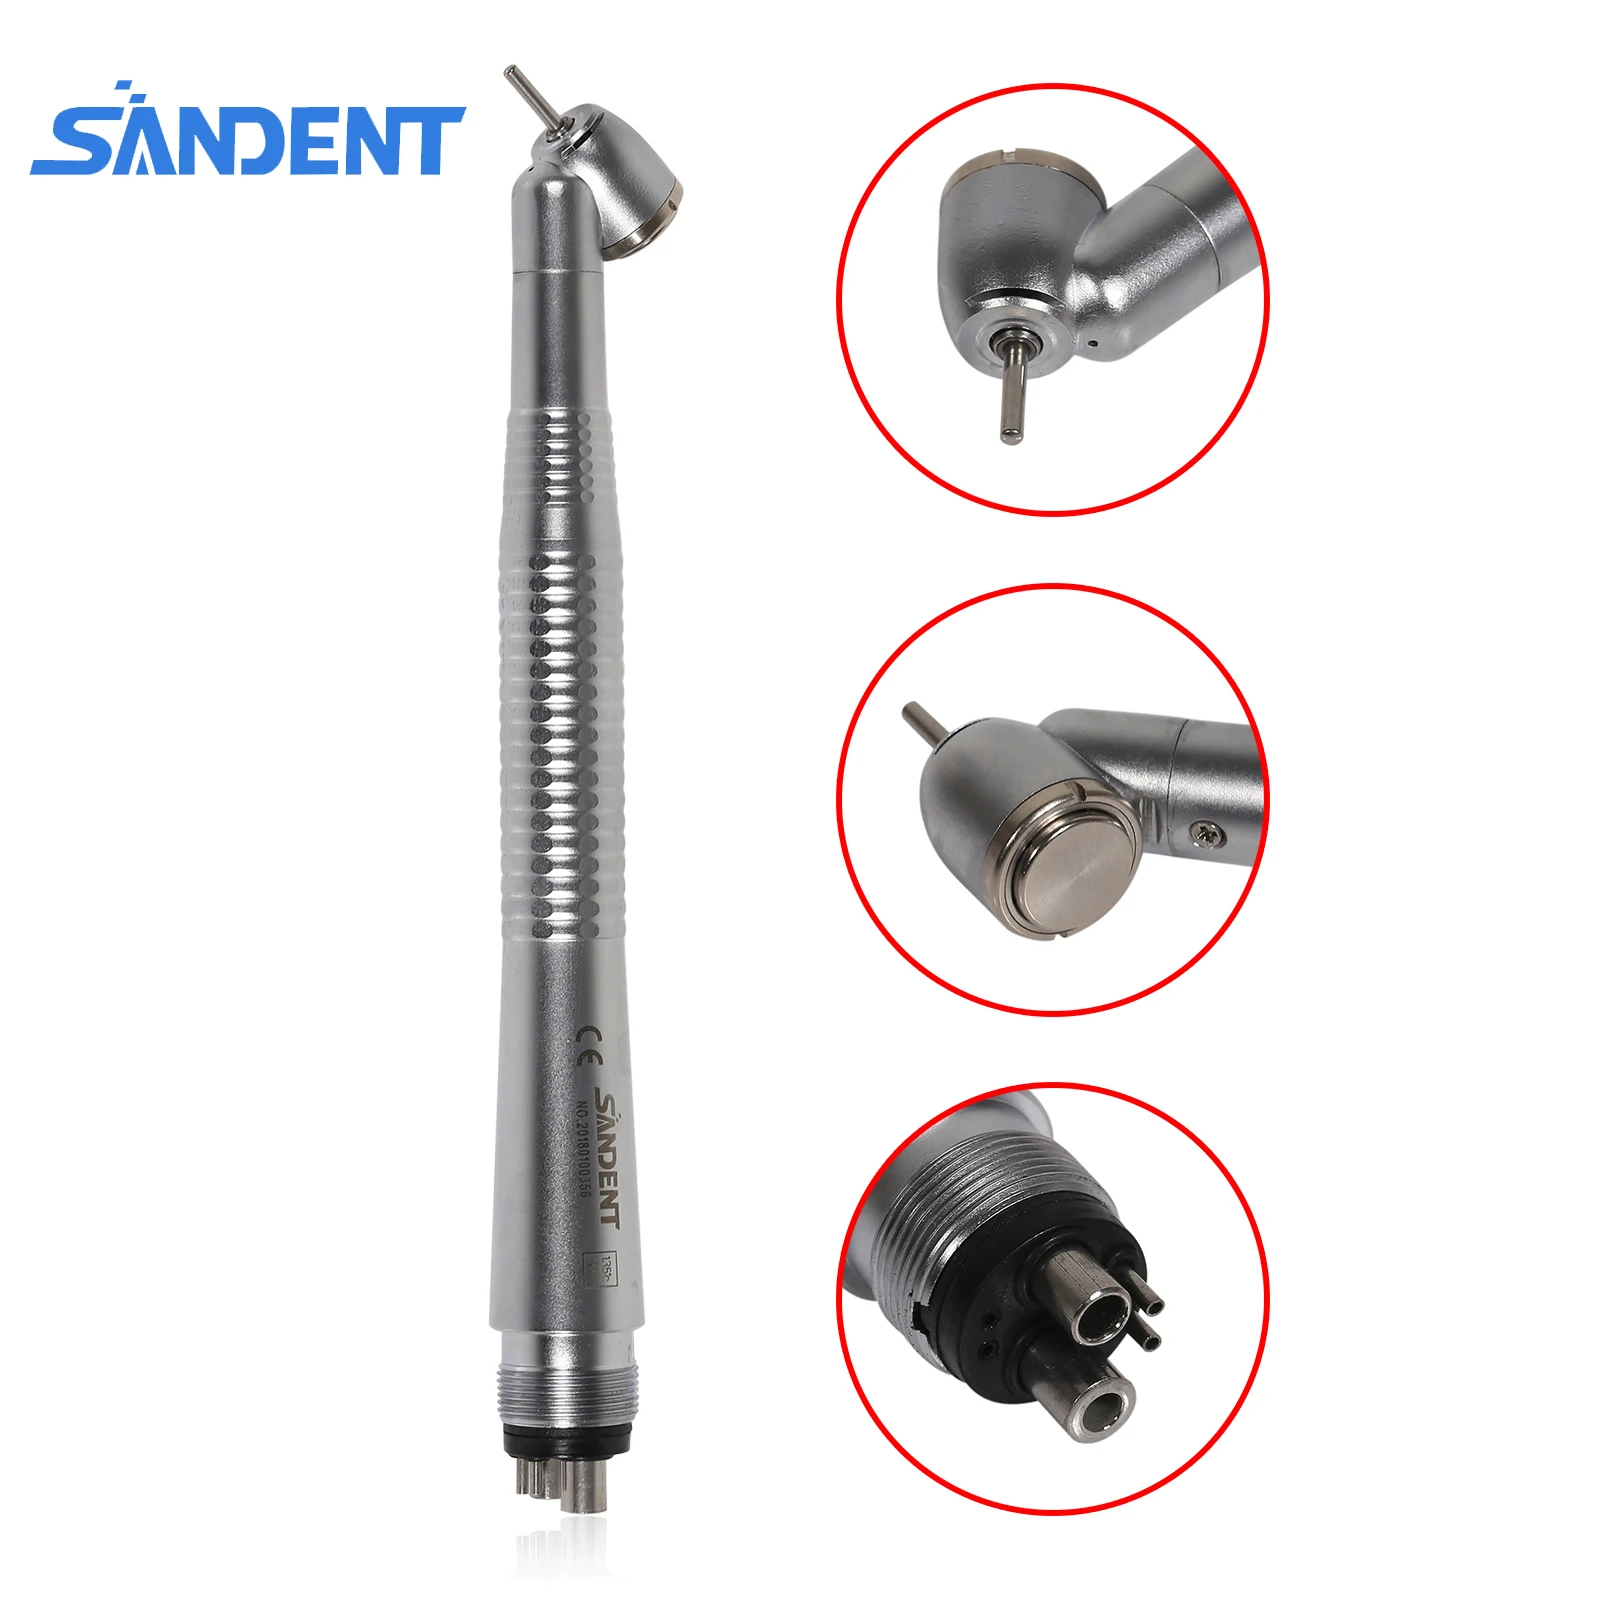 SANDENT Dental High Speed Handpiece 45 Degree Head 4 Hole Single Water Spring Push Button Type Dentist Turbine Fit NSK CA4 dental high speed handpiece synea air turbine dental handpiece 2 hole b2 4 hole m4 for nsk pana max cartirdge rotor air turbine